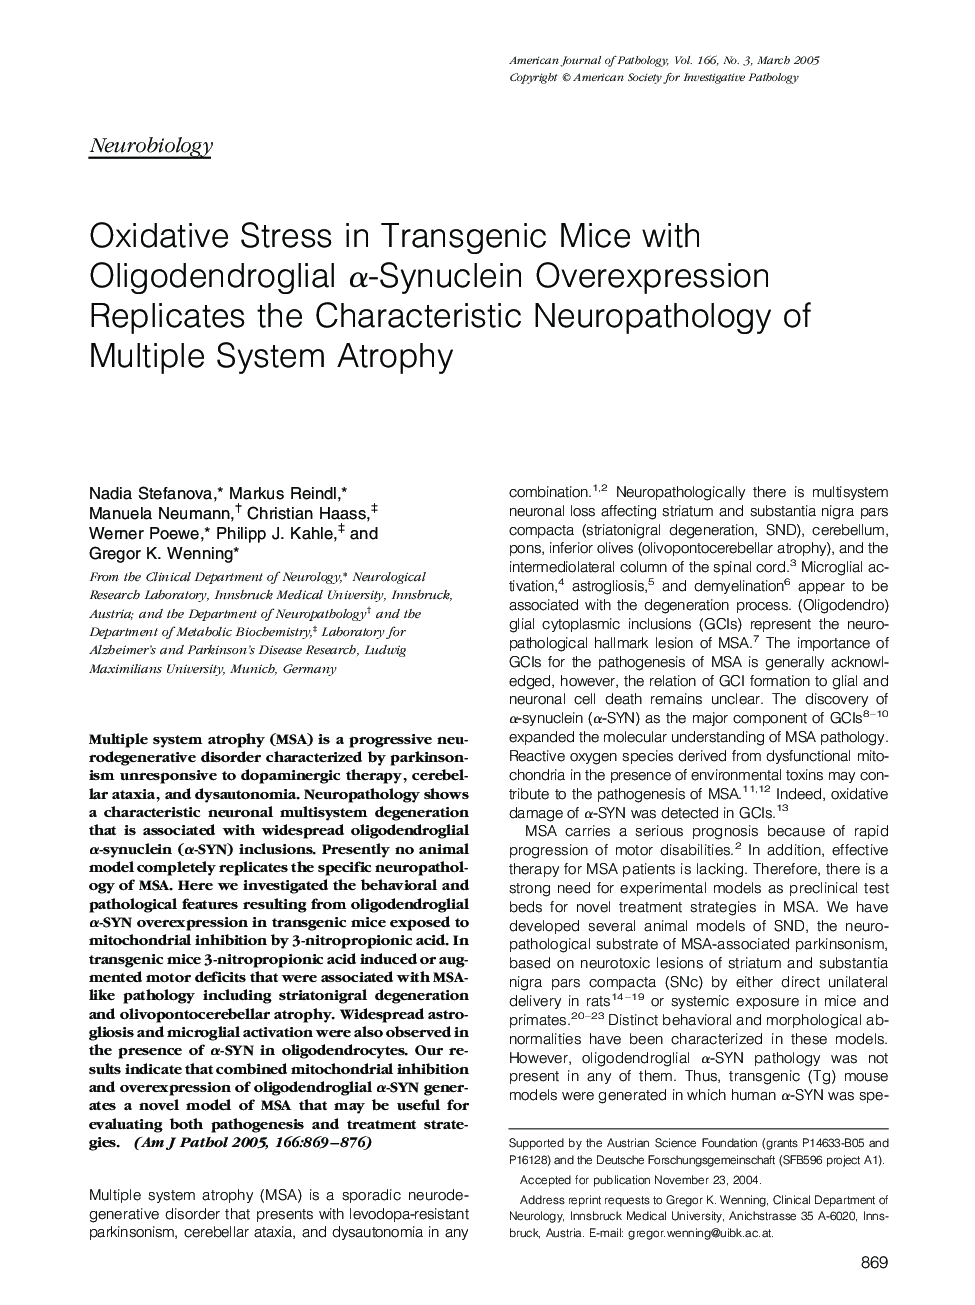 Oxidative Stress in Transgenic Mice with Oligodendroglial Î±-Synuclein Overexpression Replicates the Characteristic Neuropathology of Multiple System Atrophy